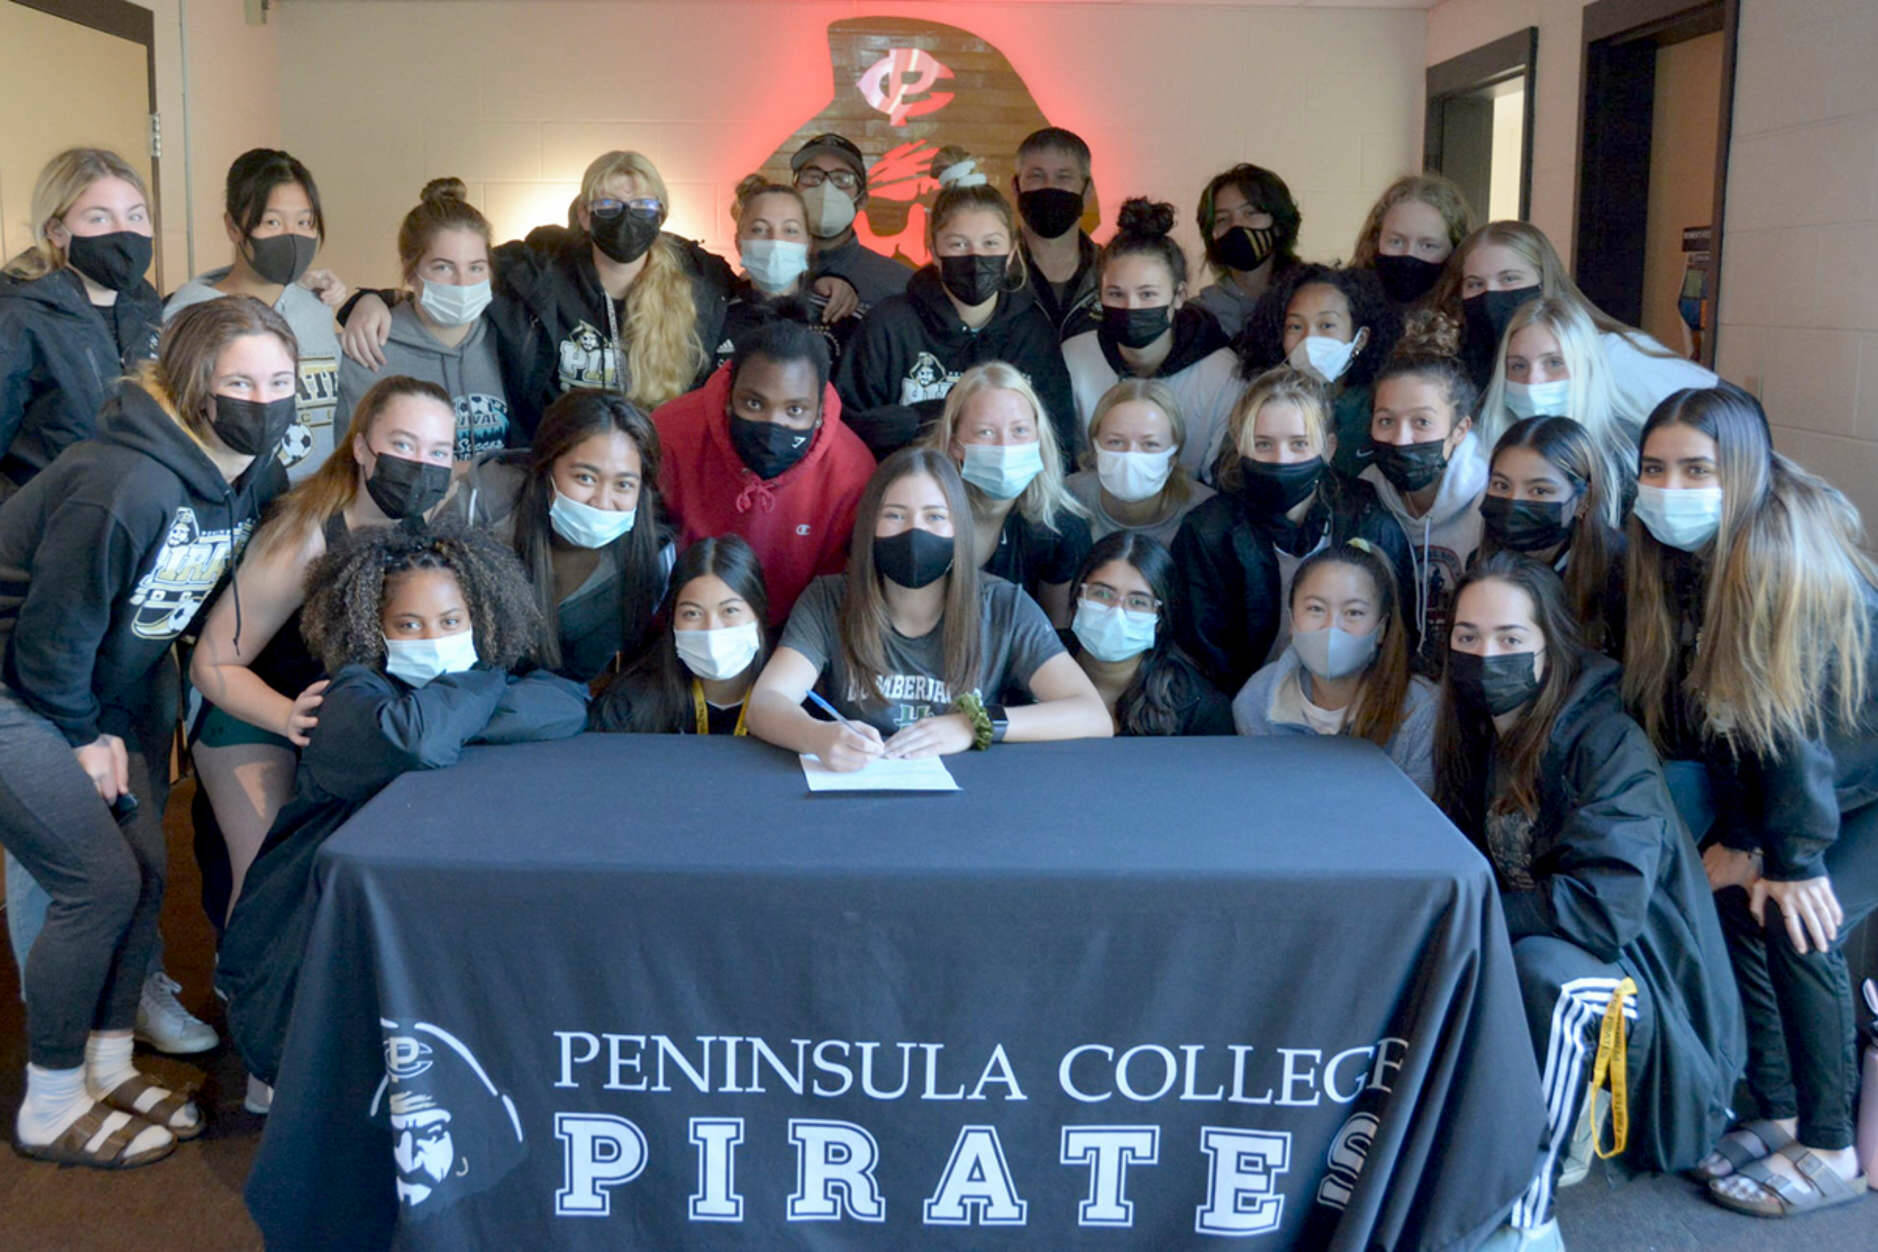 Peninsula College
Peninsula College's Grace Johnson, center, signs to play women's soccer for Humboldt State University in Arcata, Calif., late last week surrounded by her Pirates teammates after her team won the NWAC championship.